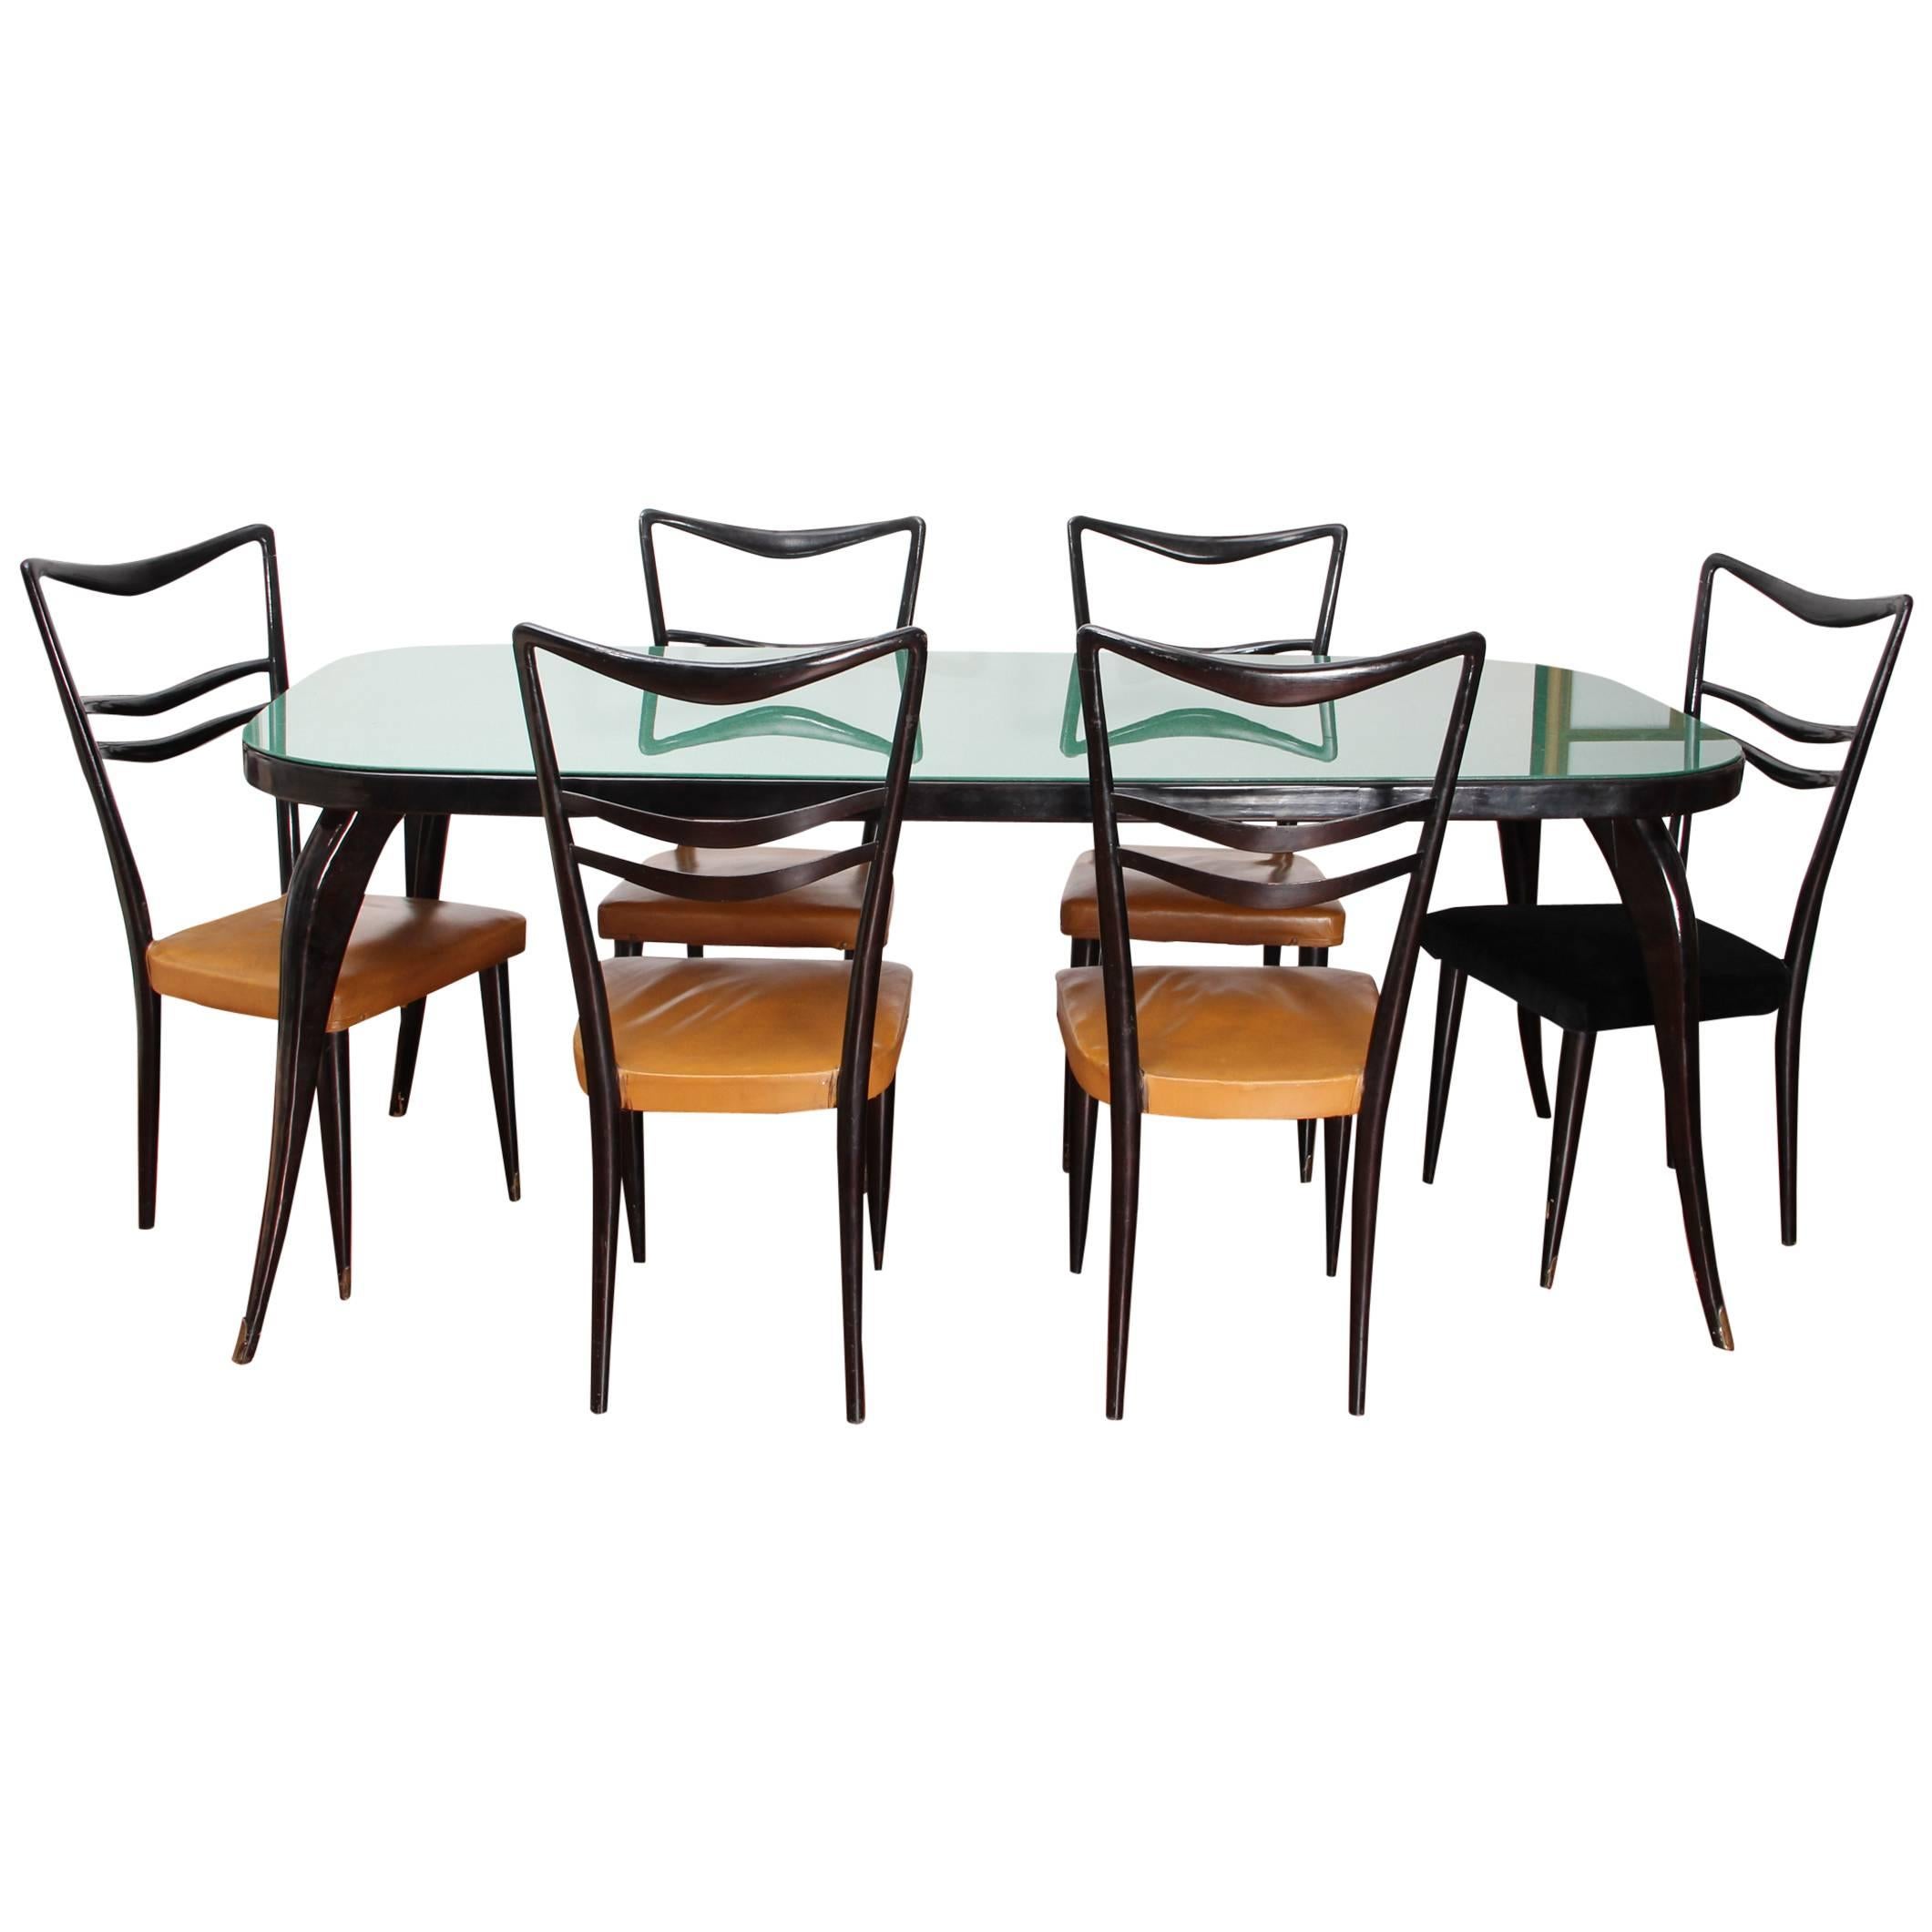 Beautiful Italian Dining Room Set in the Style of Paolo Buffa from the 1950s